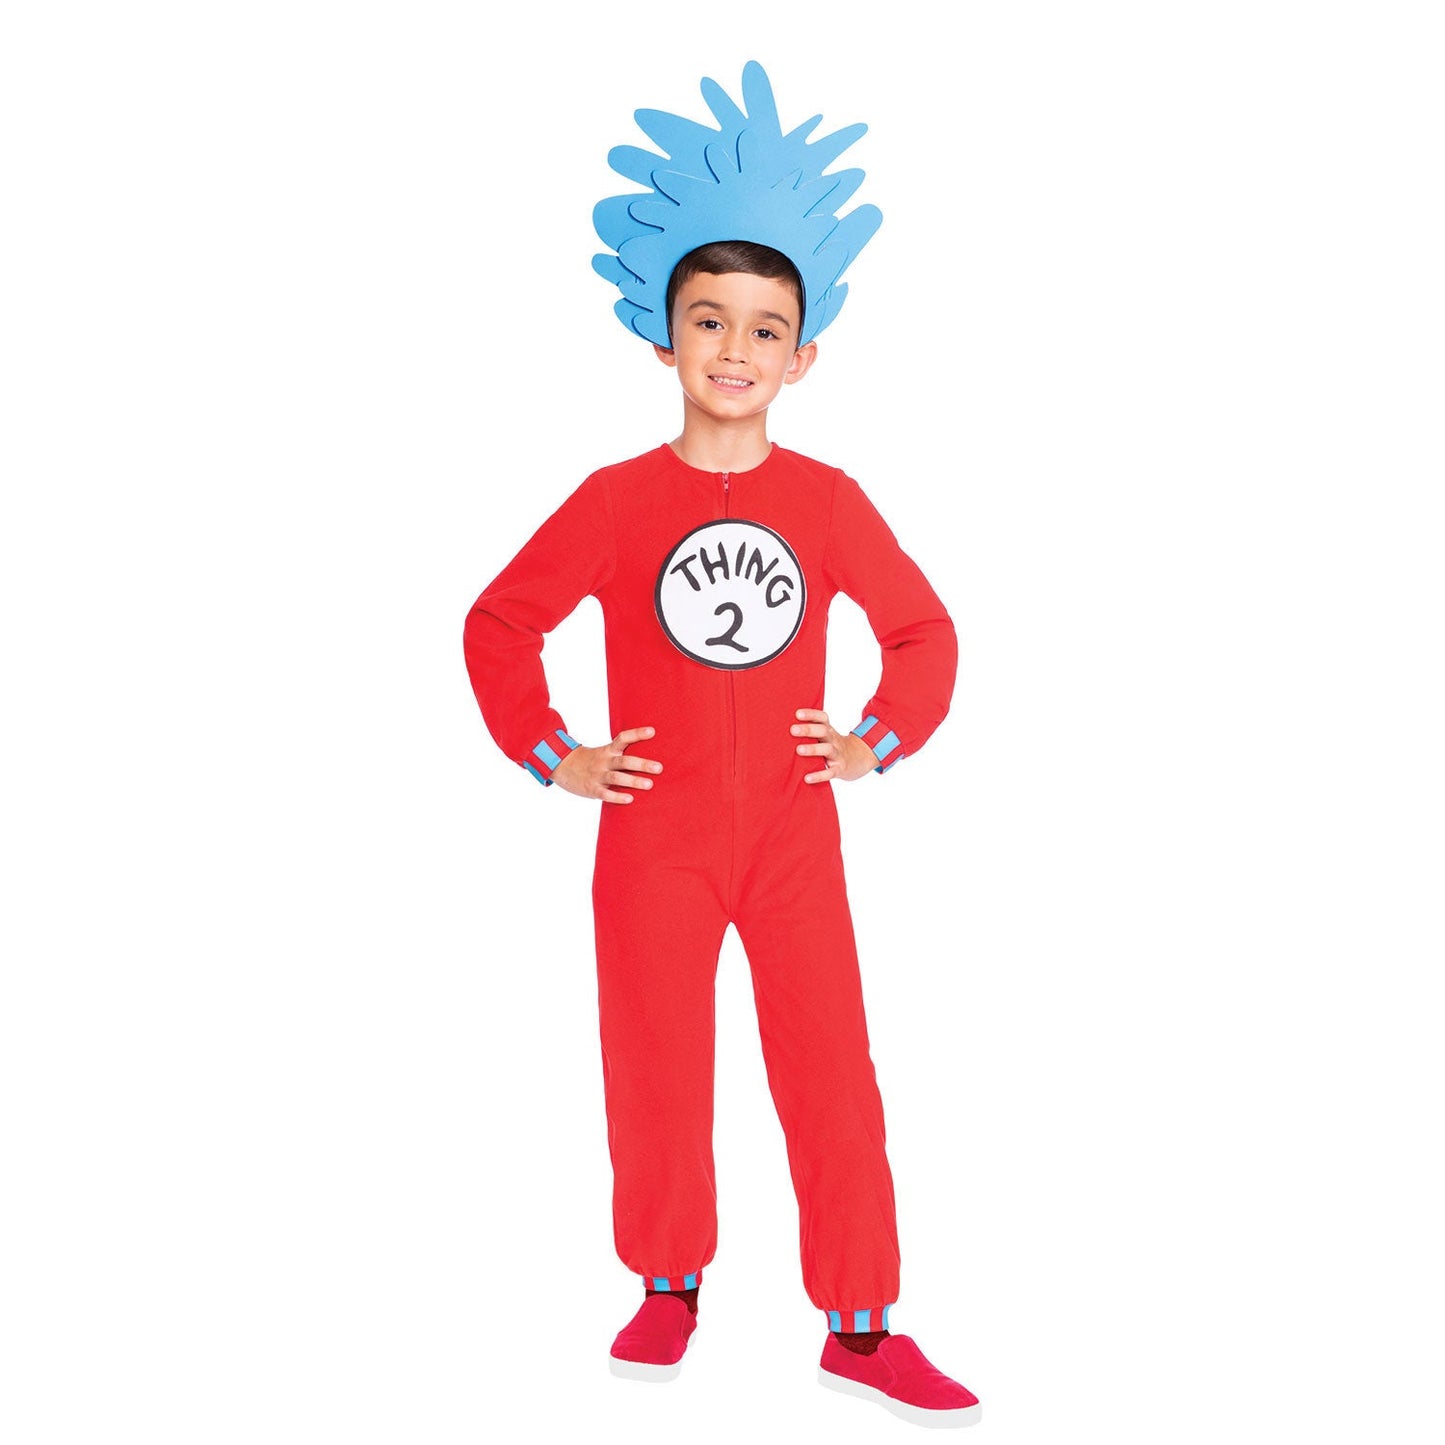 Thing One and Two Costume includes red jumpsuit with blue and red striped wrist and ankle cuffs, two interchangeable printed felt Thing 1 and 2 chest badges and blue character EVA double layer shaped headpiece